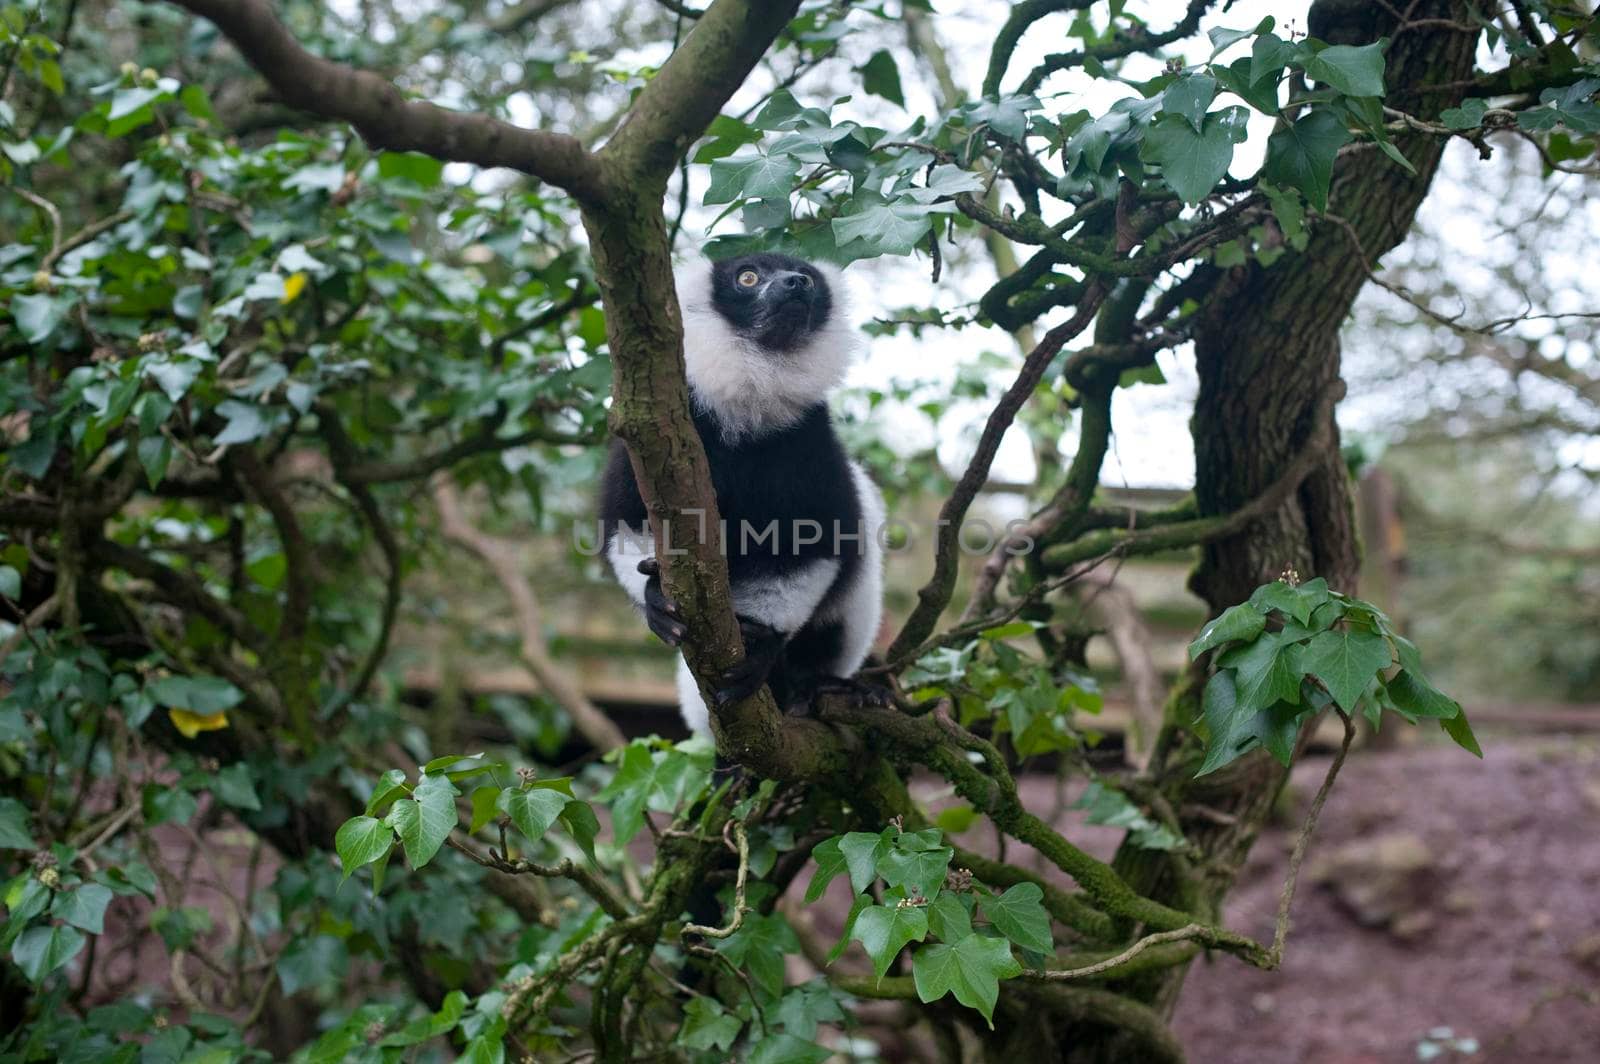 Black and white lemur, a small primate from Madagascar, climbing in a tree